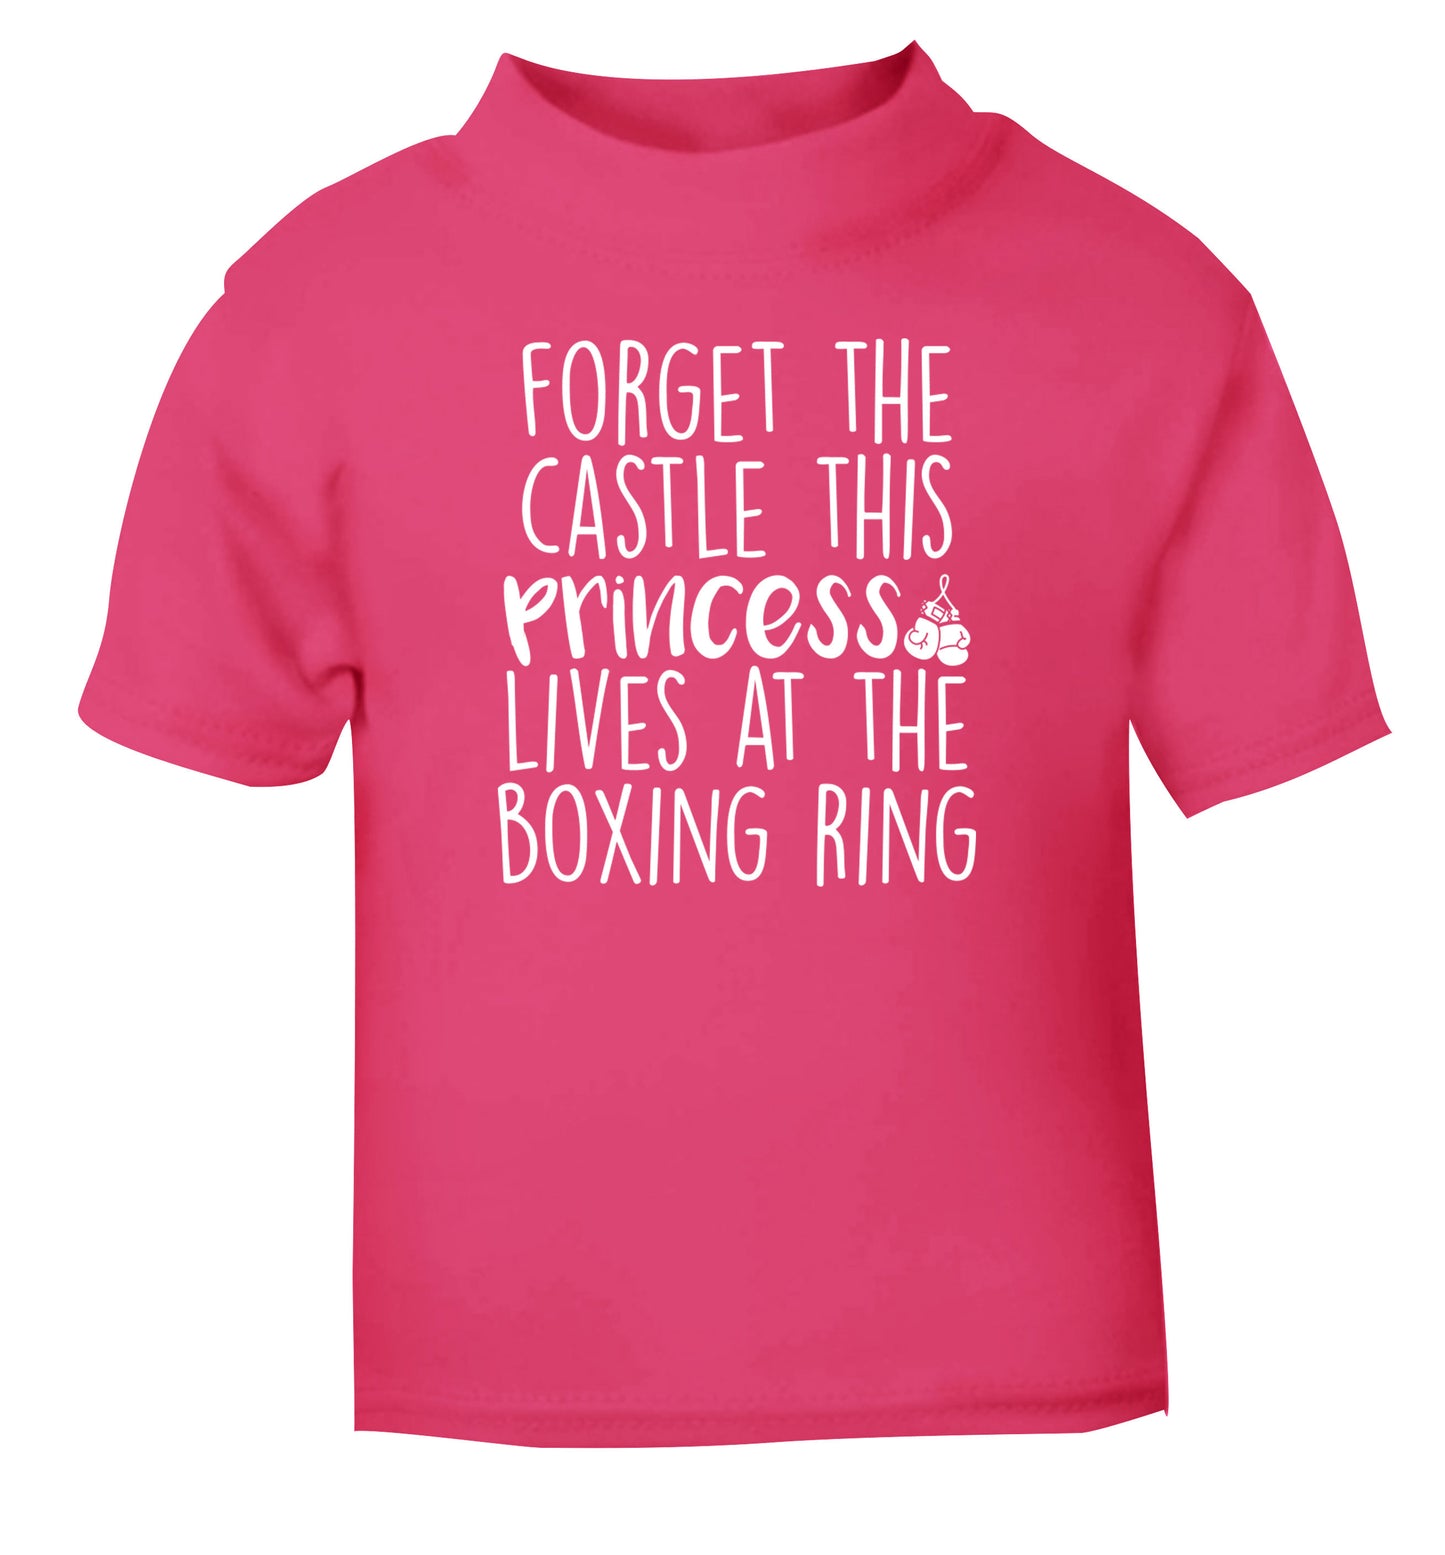 Forget the castle this princess lives at the boxing ring pink Baby Toddler Tshirt 2 Years